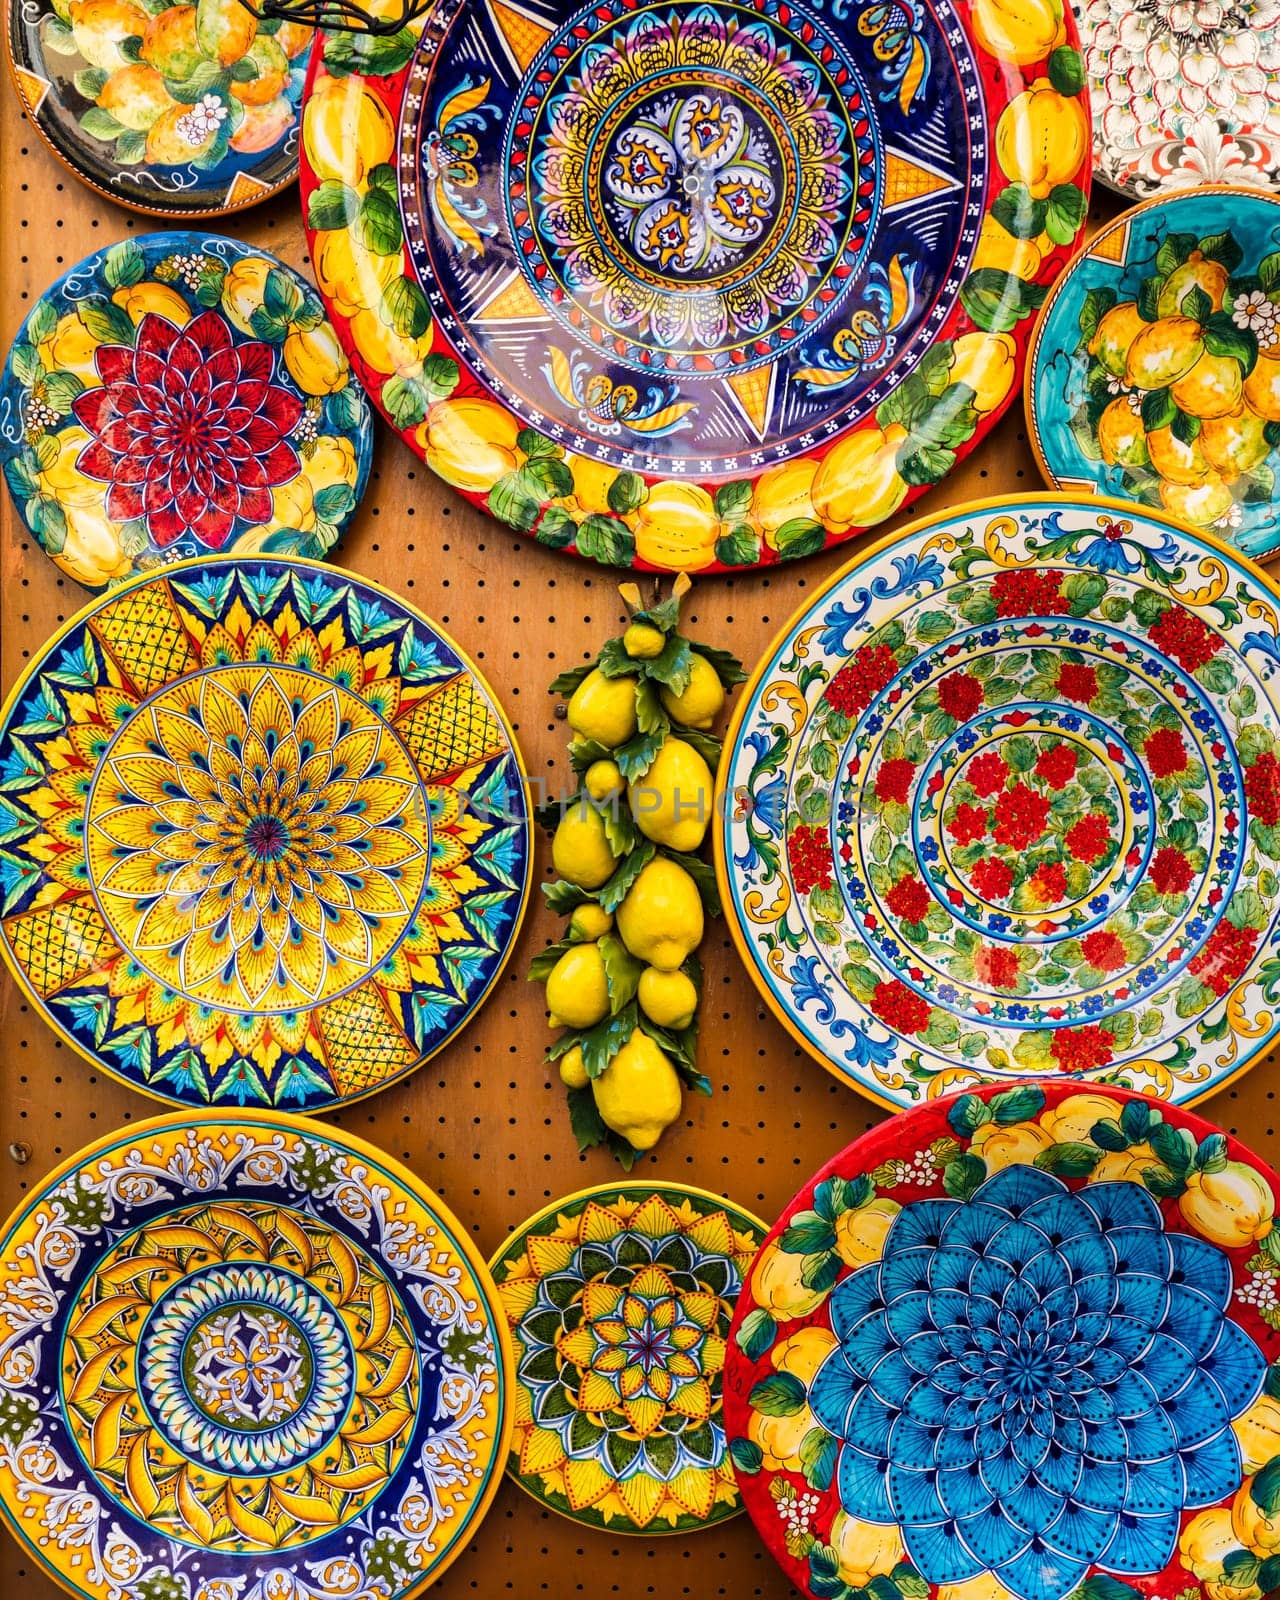 Collection of colorful Italian ceramic pottery, local craft products from Positano, Italy. Ceramic plates display in Positano, Italy. Colorful of vintage ceramic plates in Positano, Italy. by DaLiu